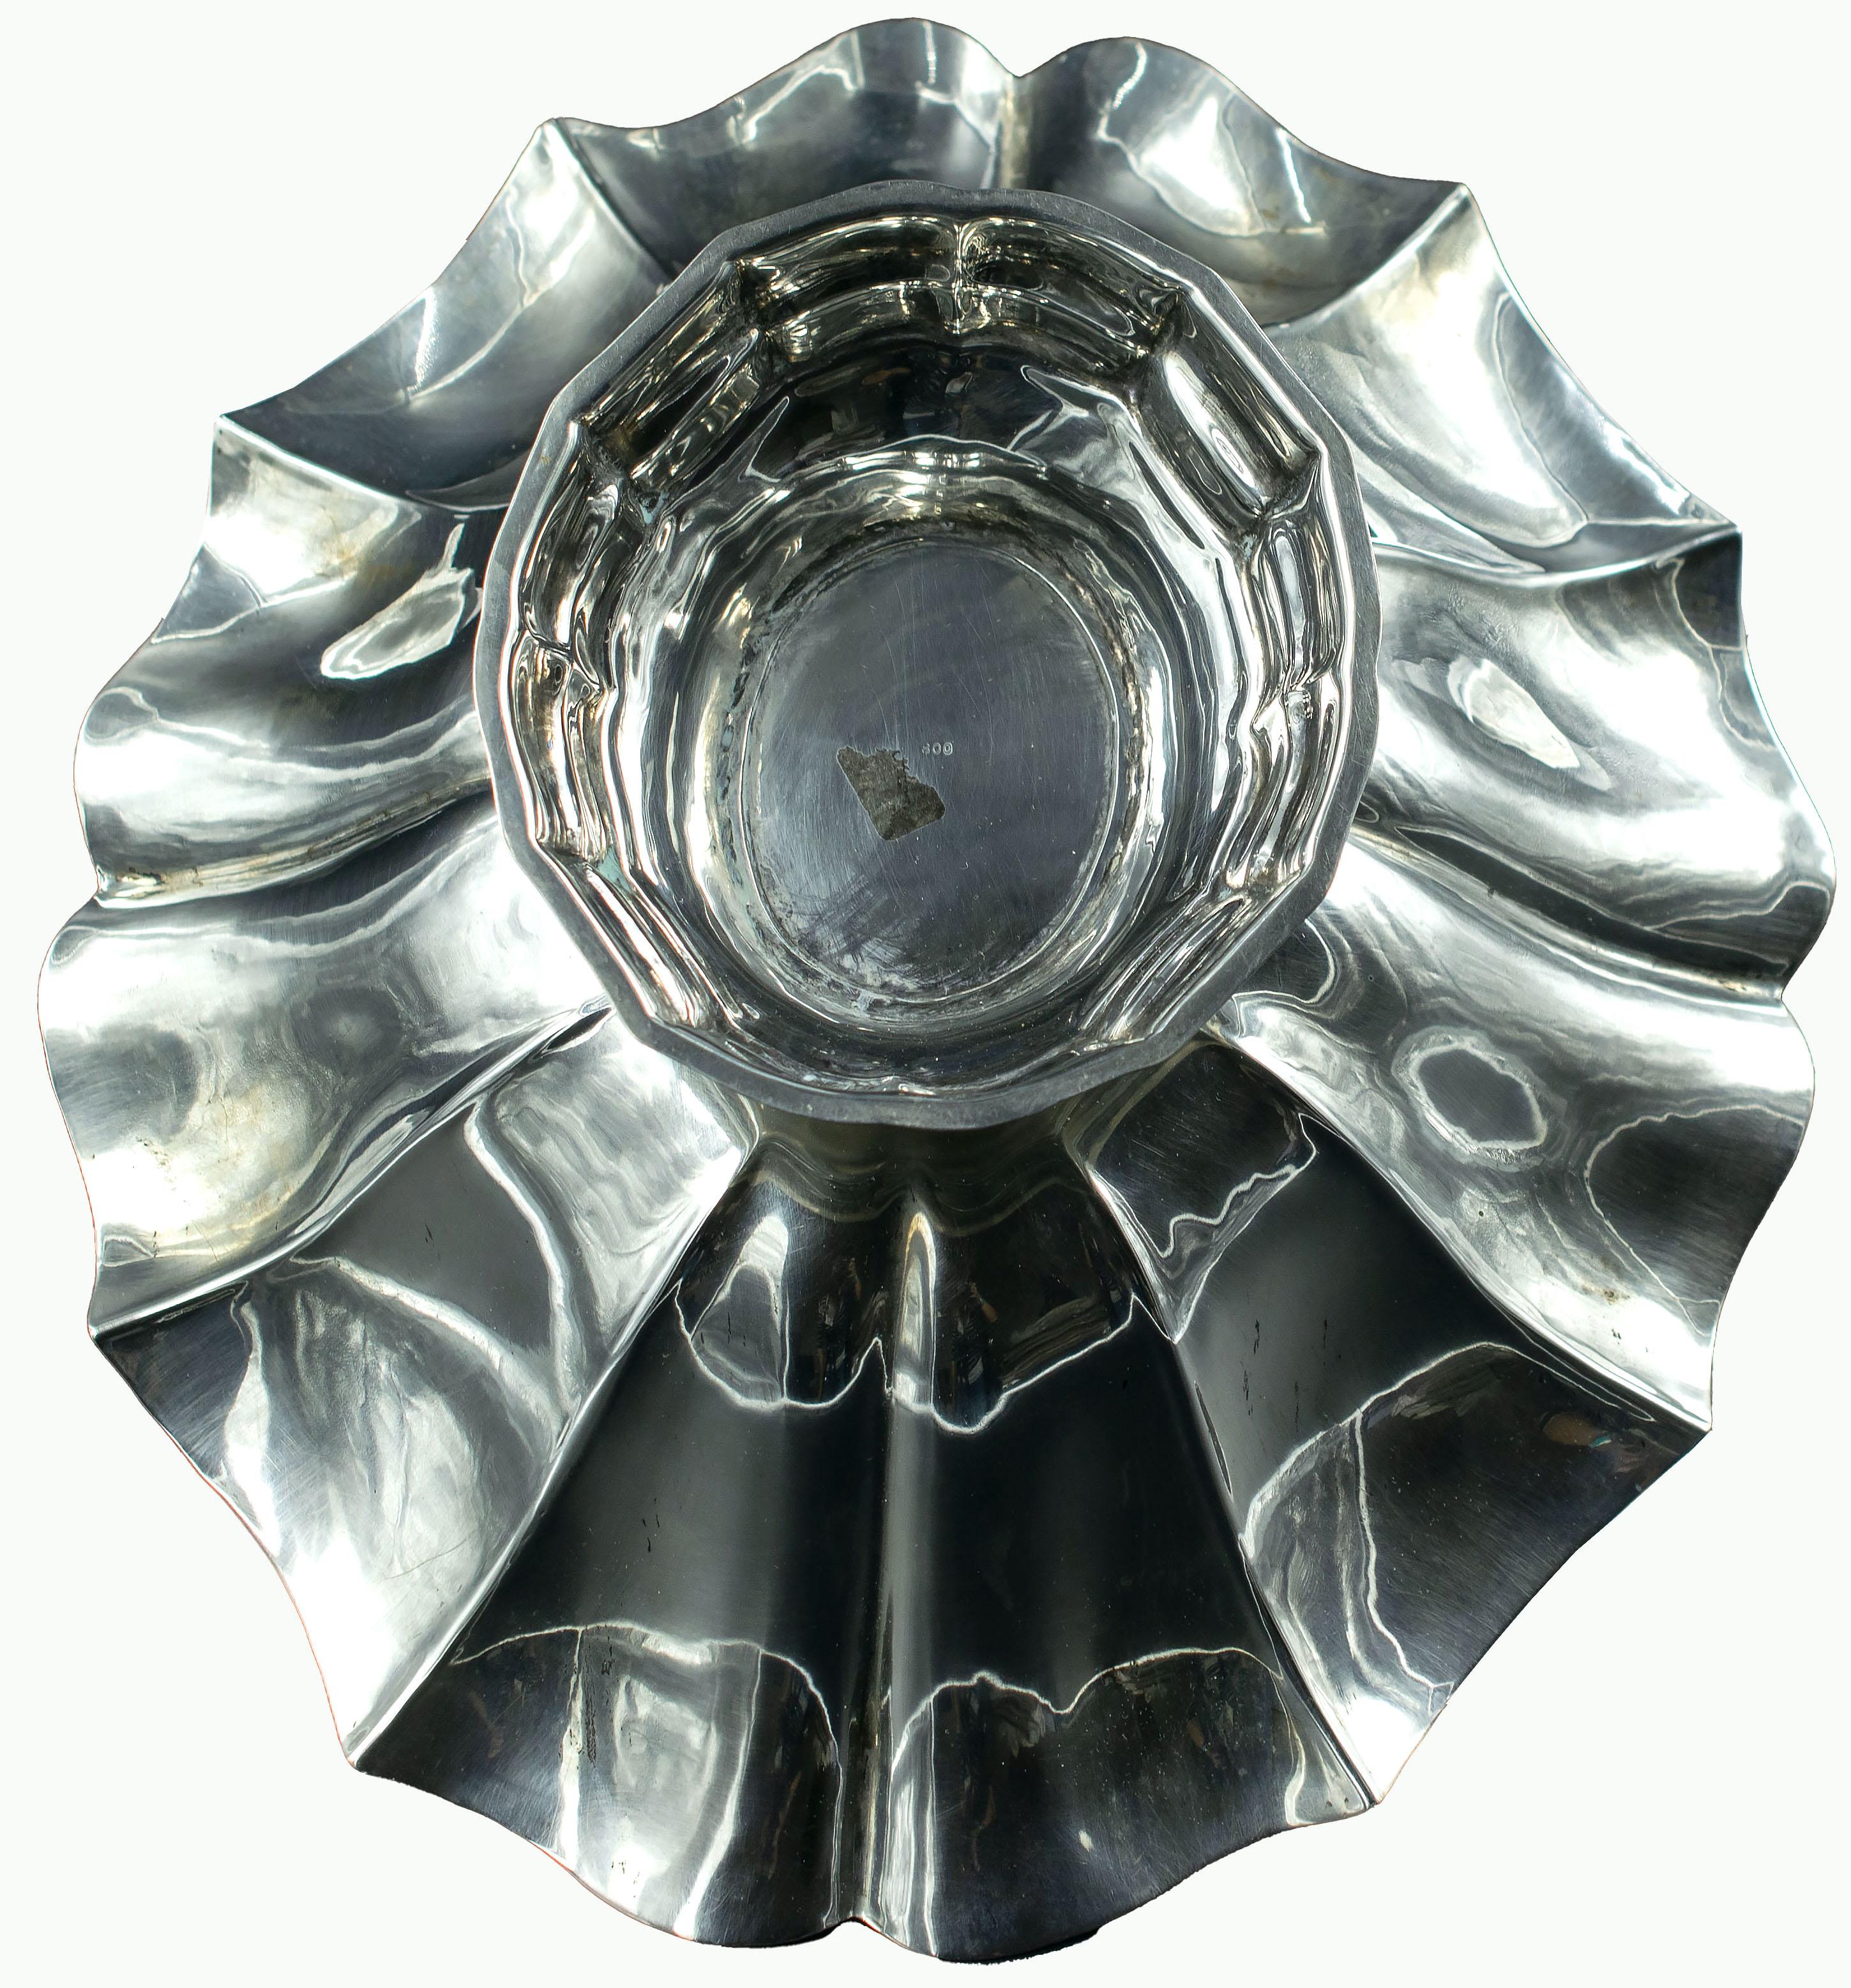 Silver centerpiece is a precious decorative object realized in the mid-20th century.

A very elegant silver centerpiece with wavy edges.

Supported by a circular base.